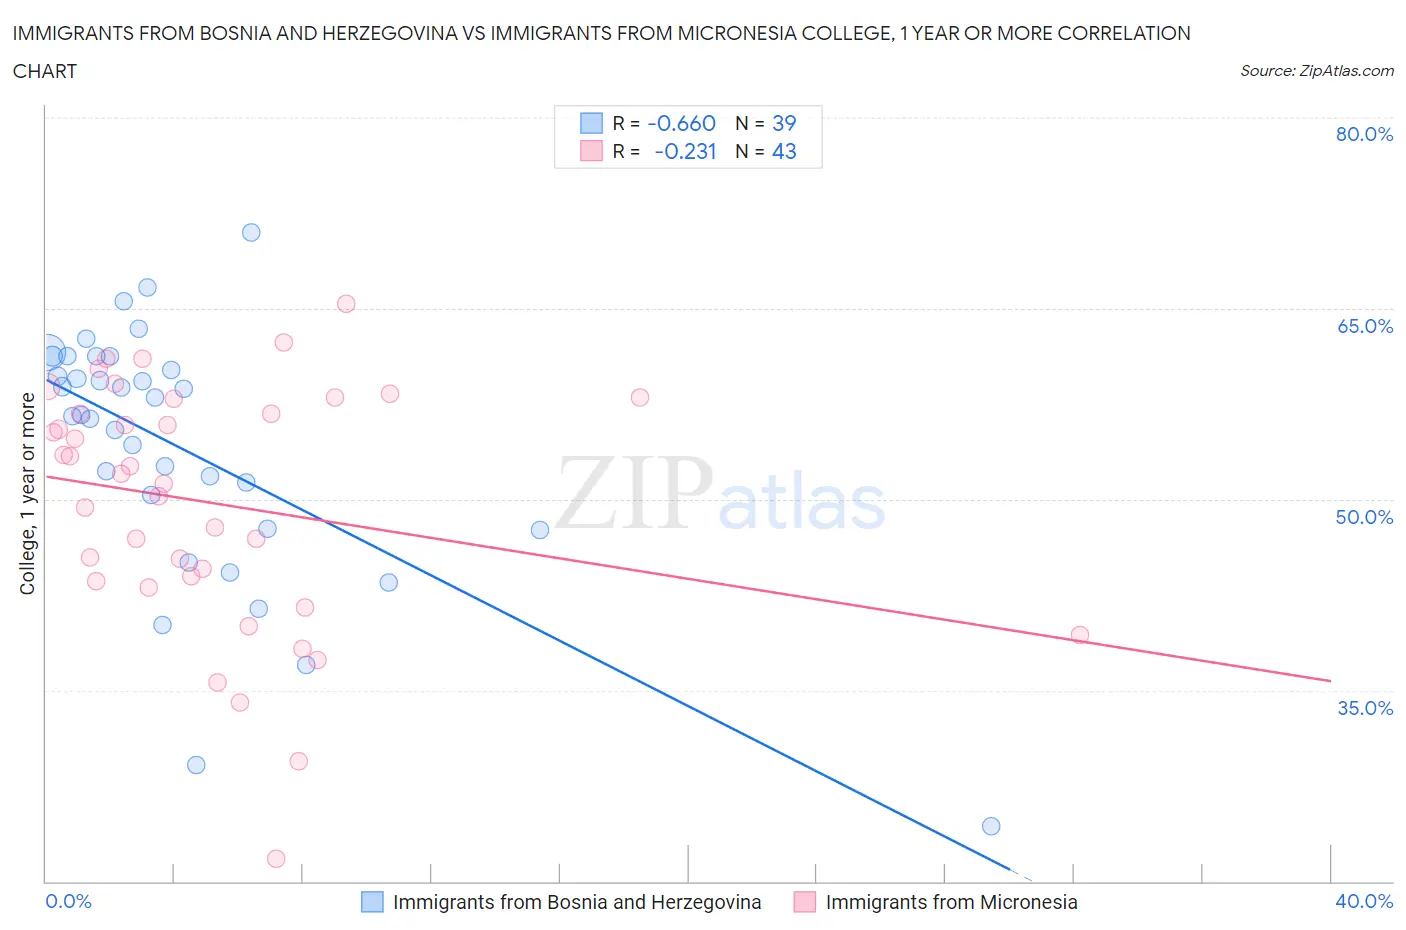 Immigrants from Bosnia and Herzegovina vs Immigrants from Micronesia College, 1 year or more